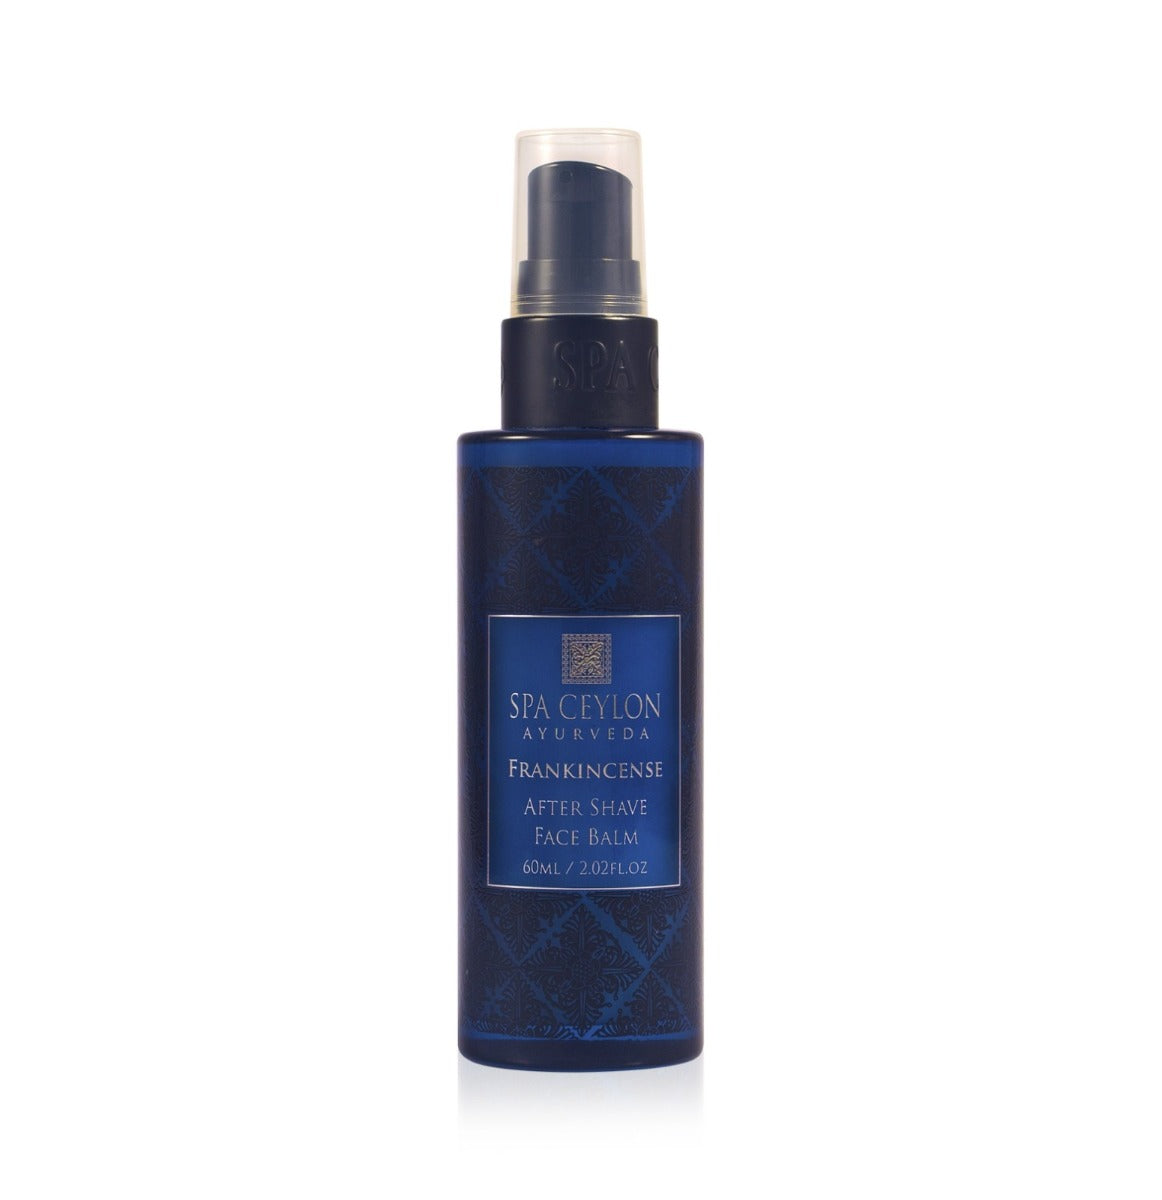 FRANKINCENSE - After Shave Face Balm 60ml